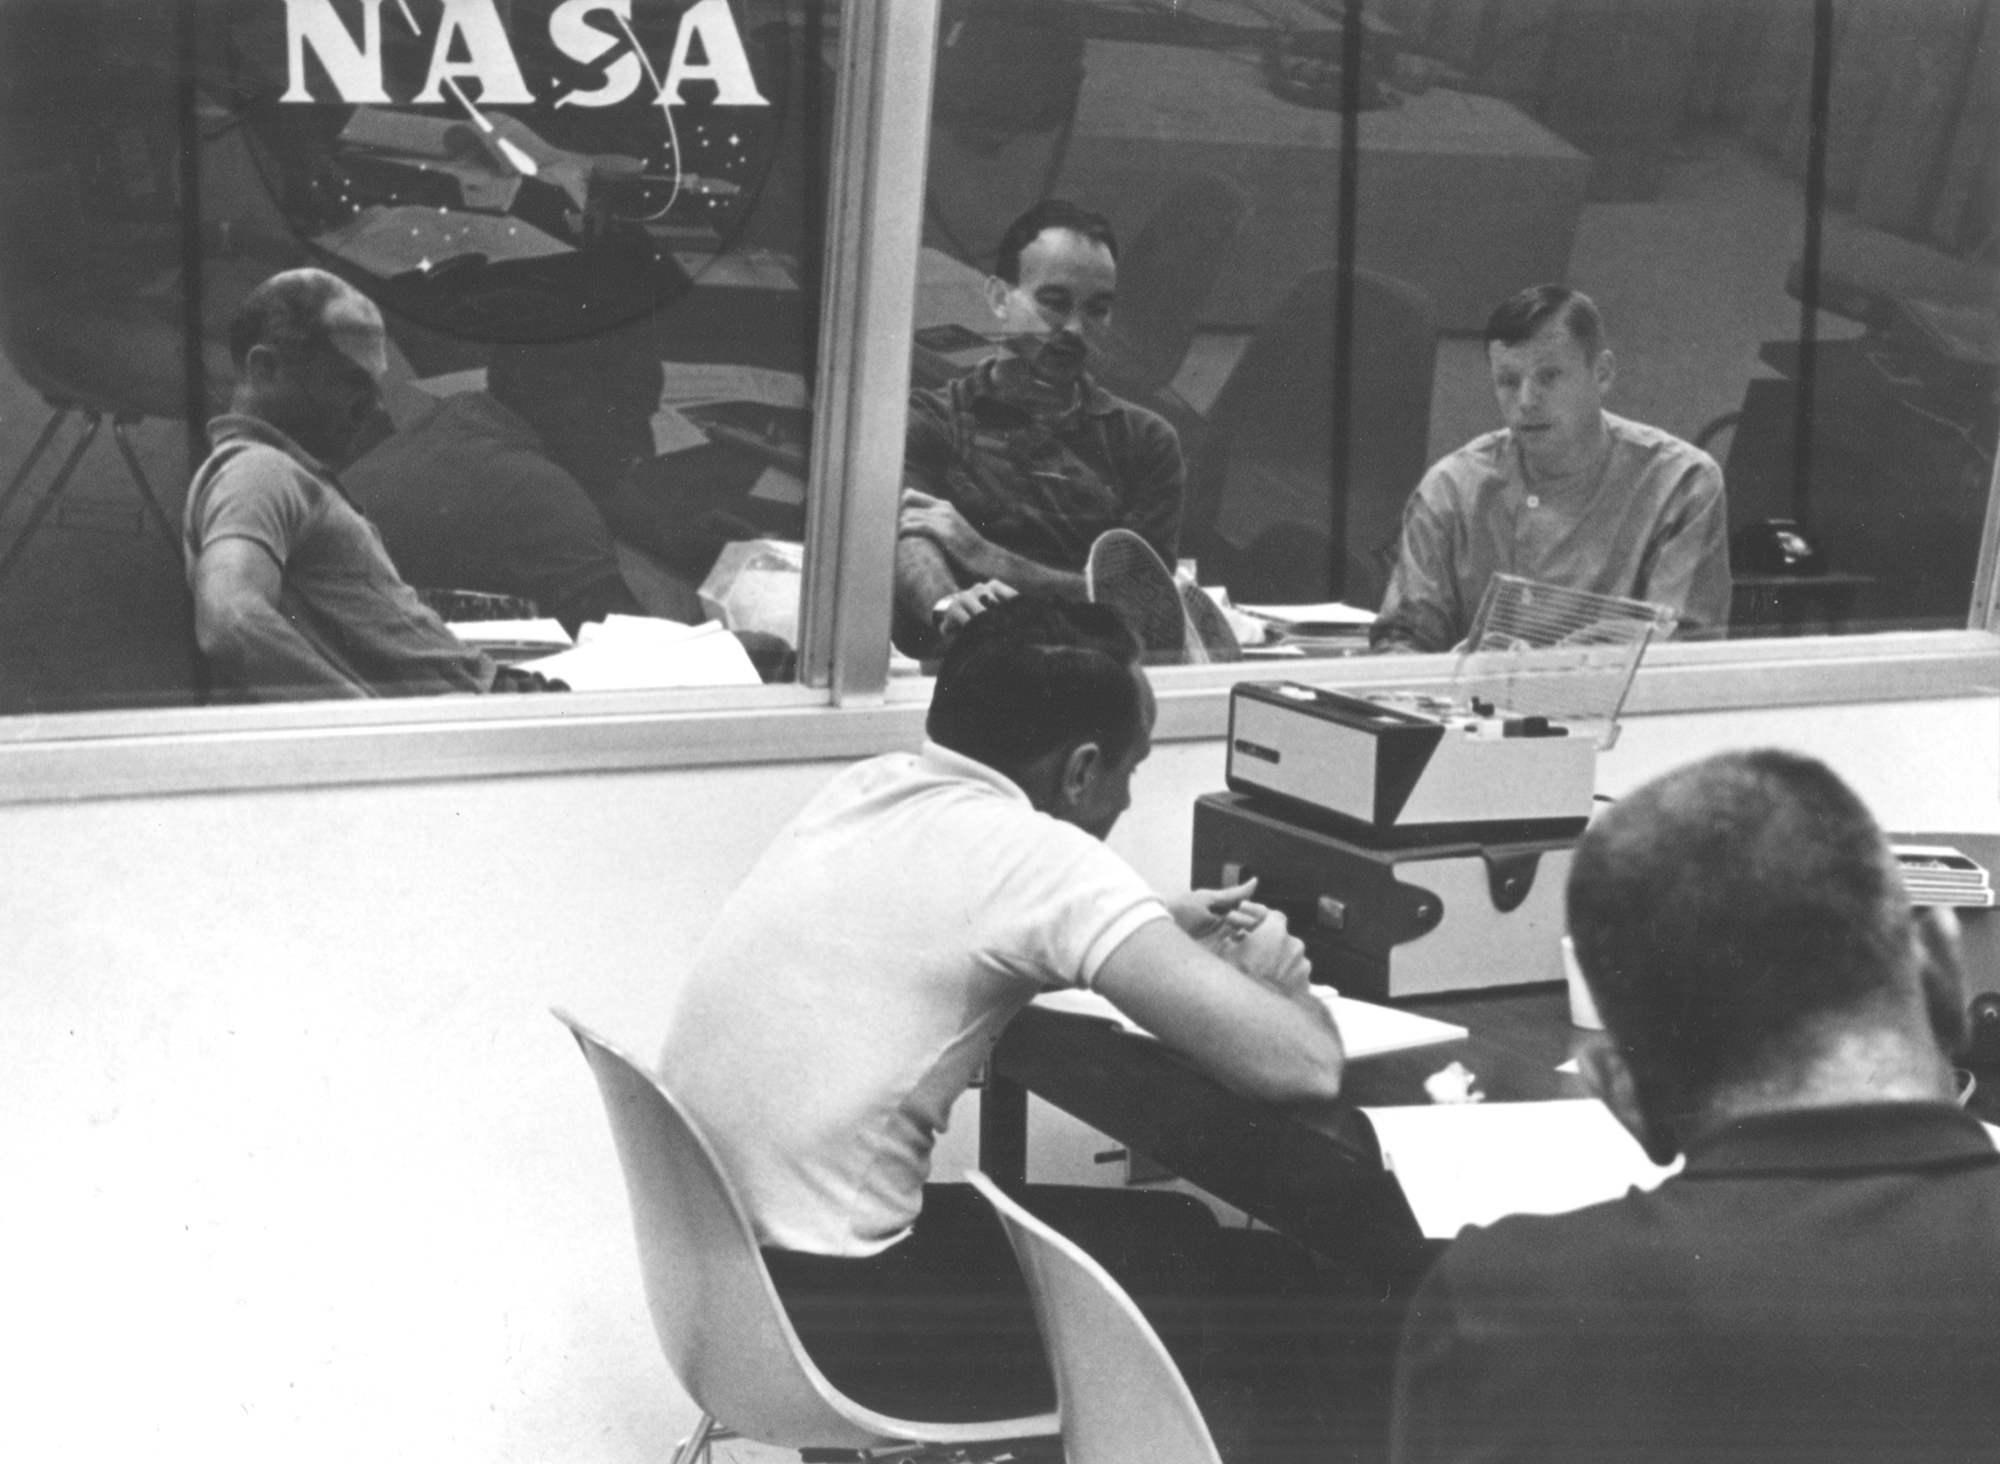 The Apollo 11 crew undergoes their first debriefing